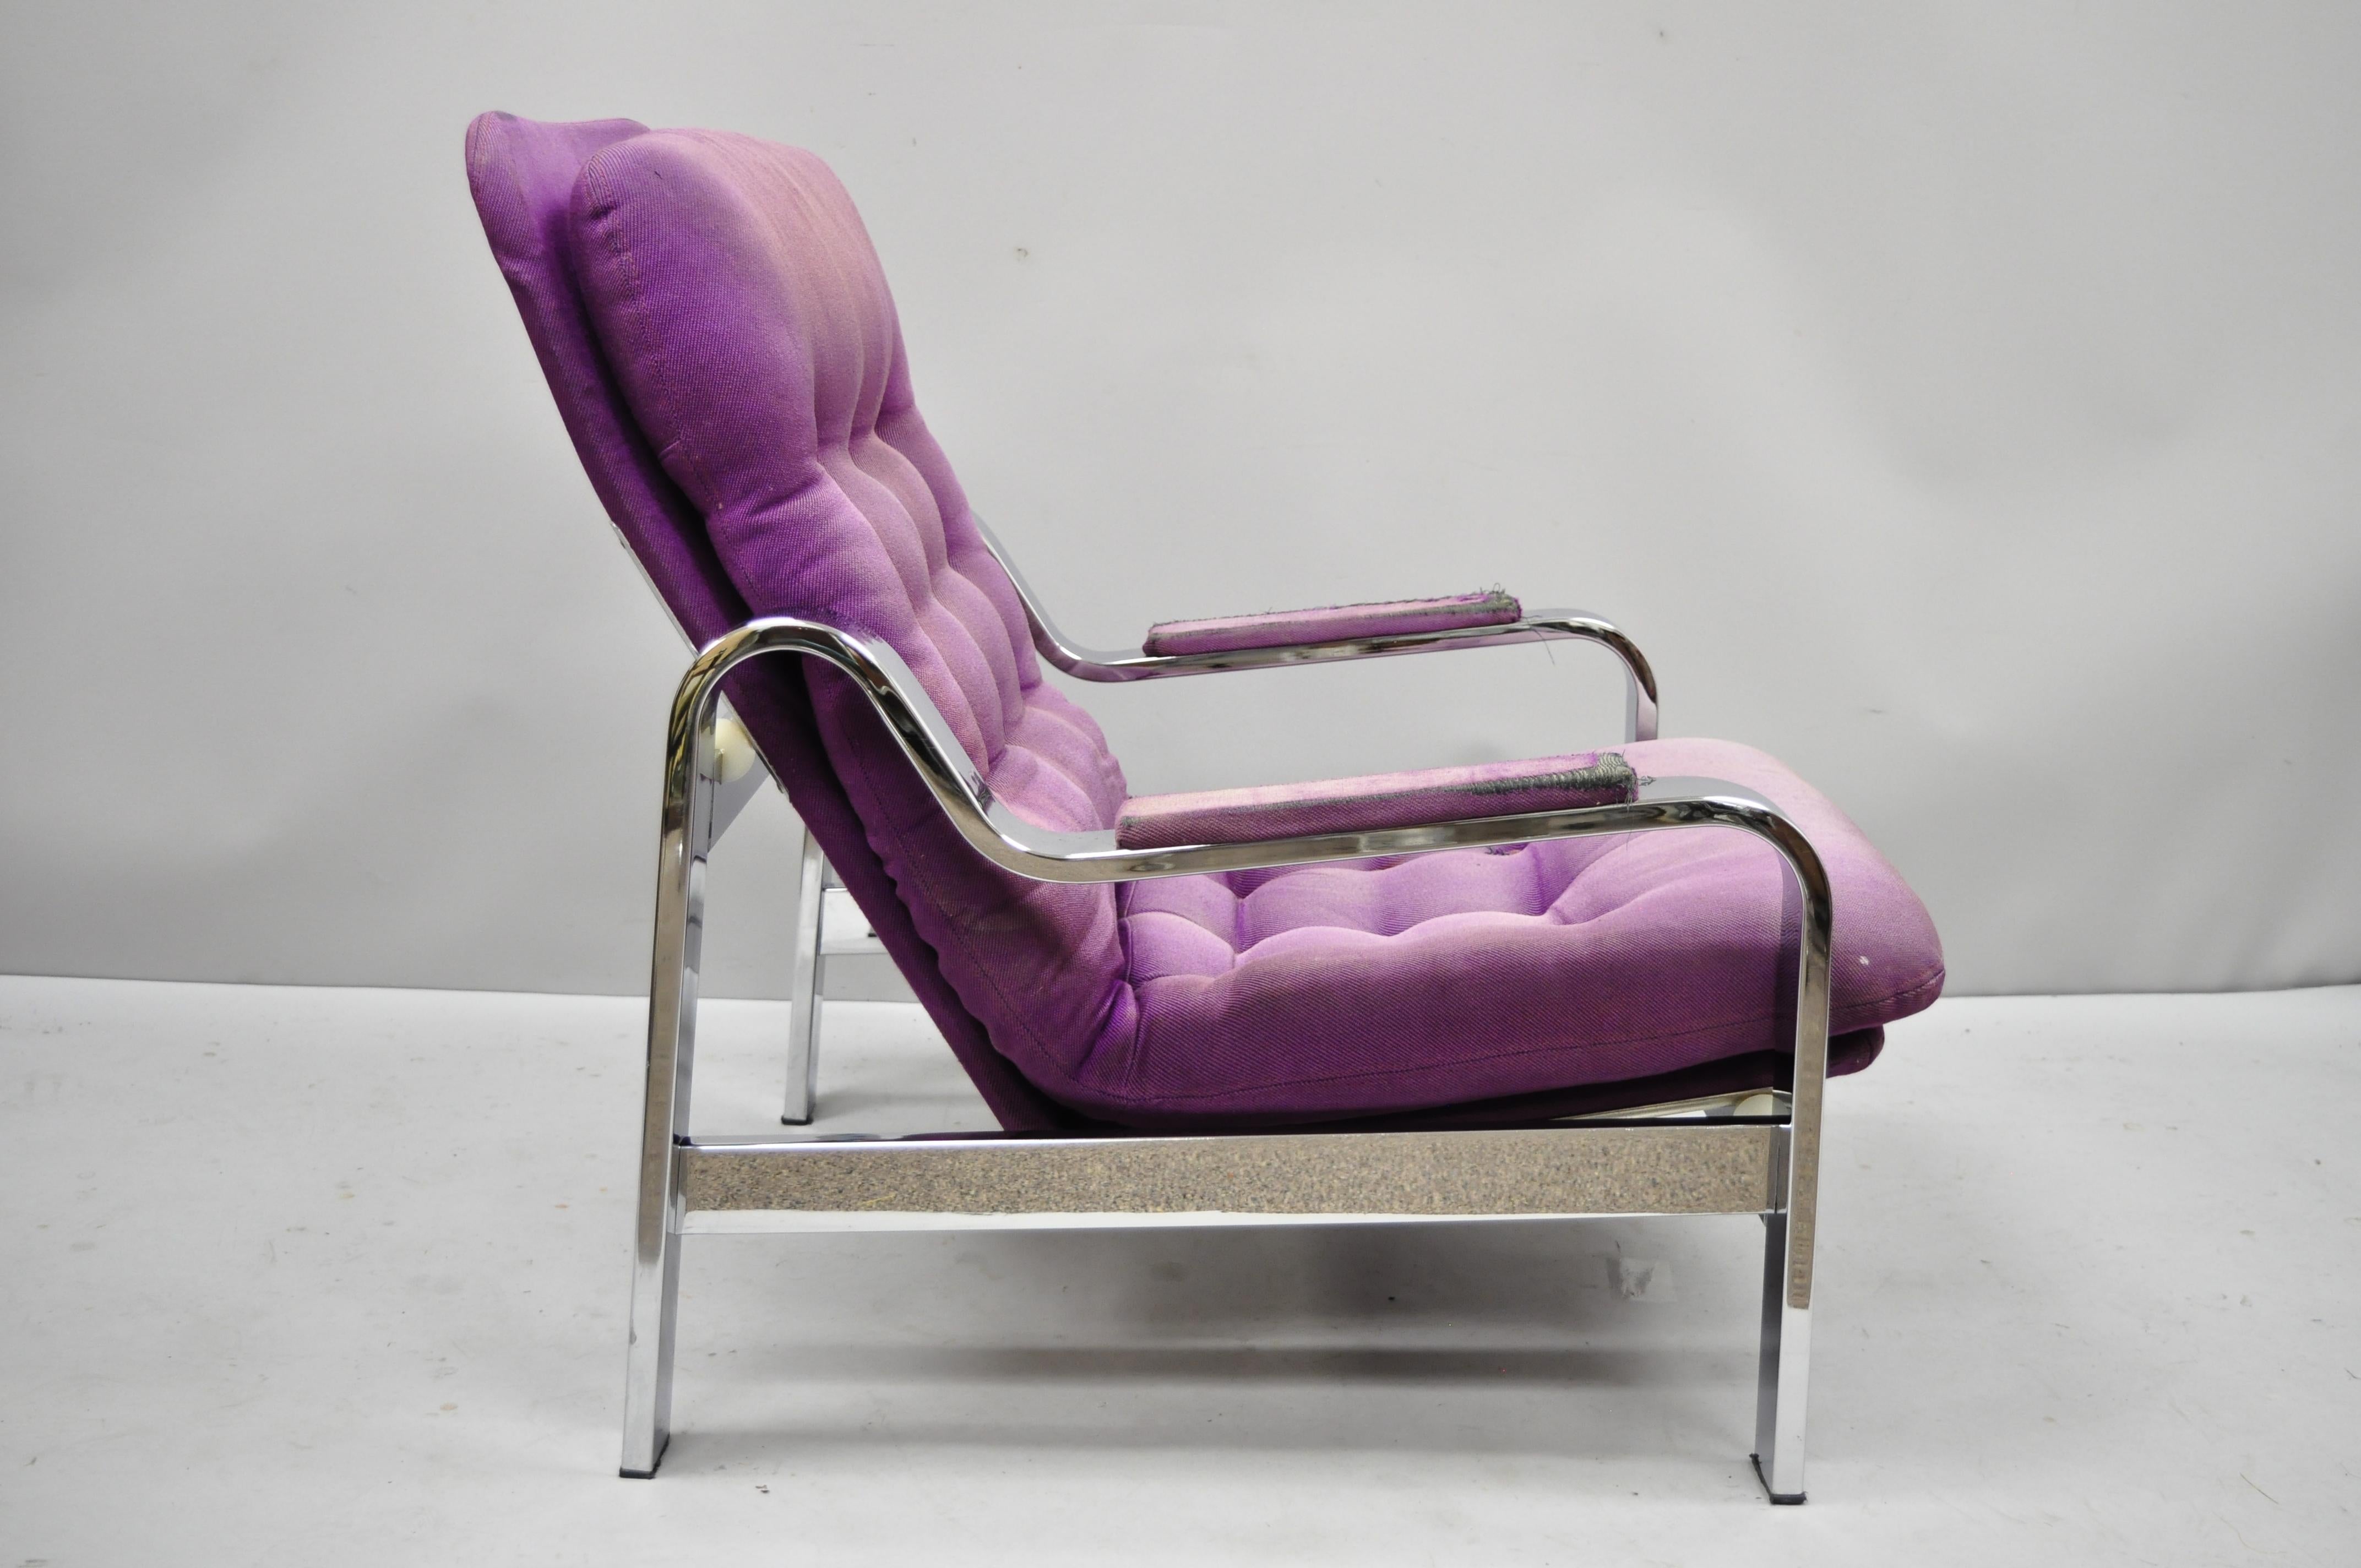 American Mid-Century Modern Chrome Selig Recliner Reclining Lounge Chair After Baughman For Sale